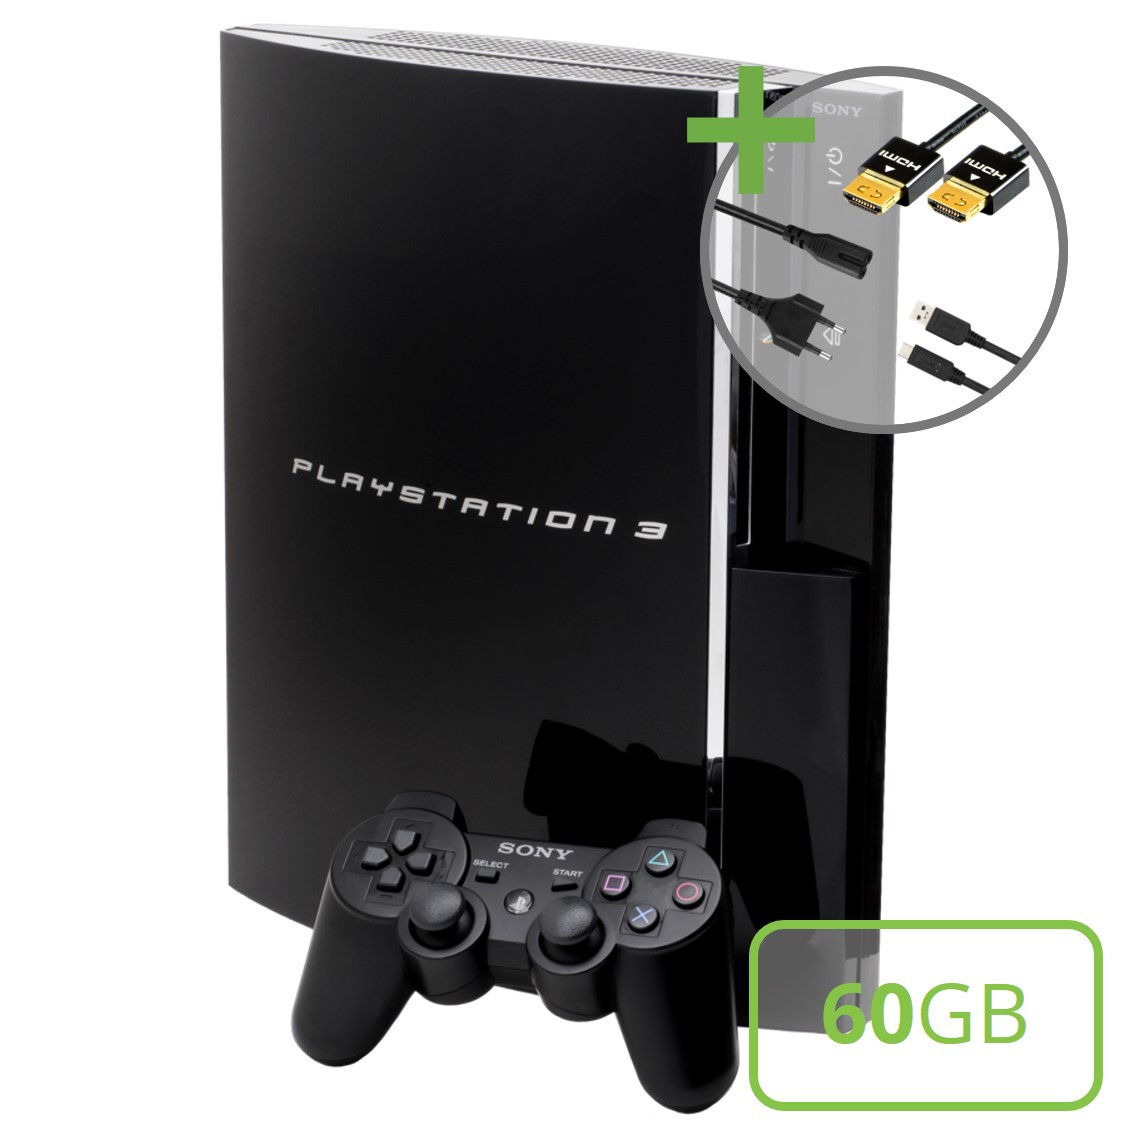 Sony PlayStation 3 Phat (60GB) Starter Pack - Sixaxis Edition - Playstation 3 Hardware - 2